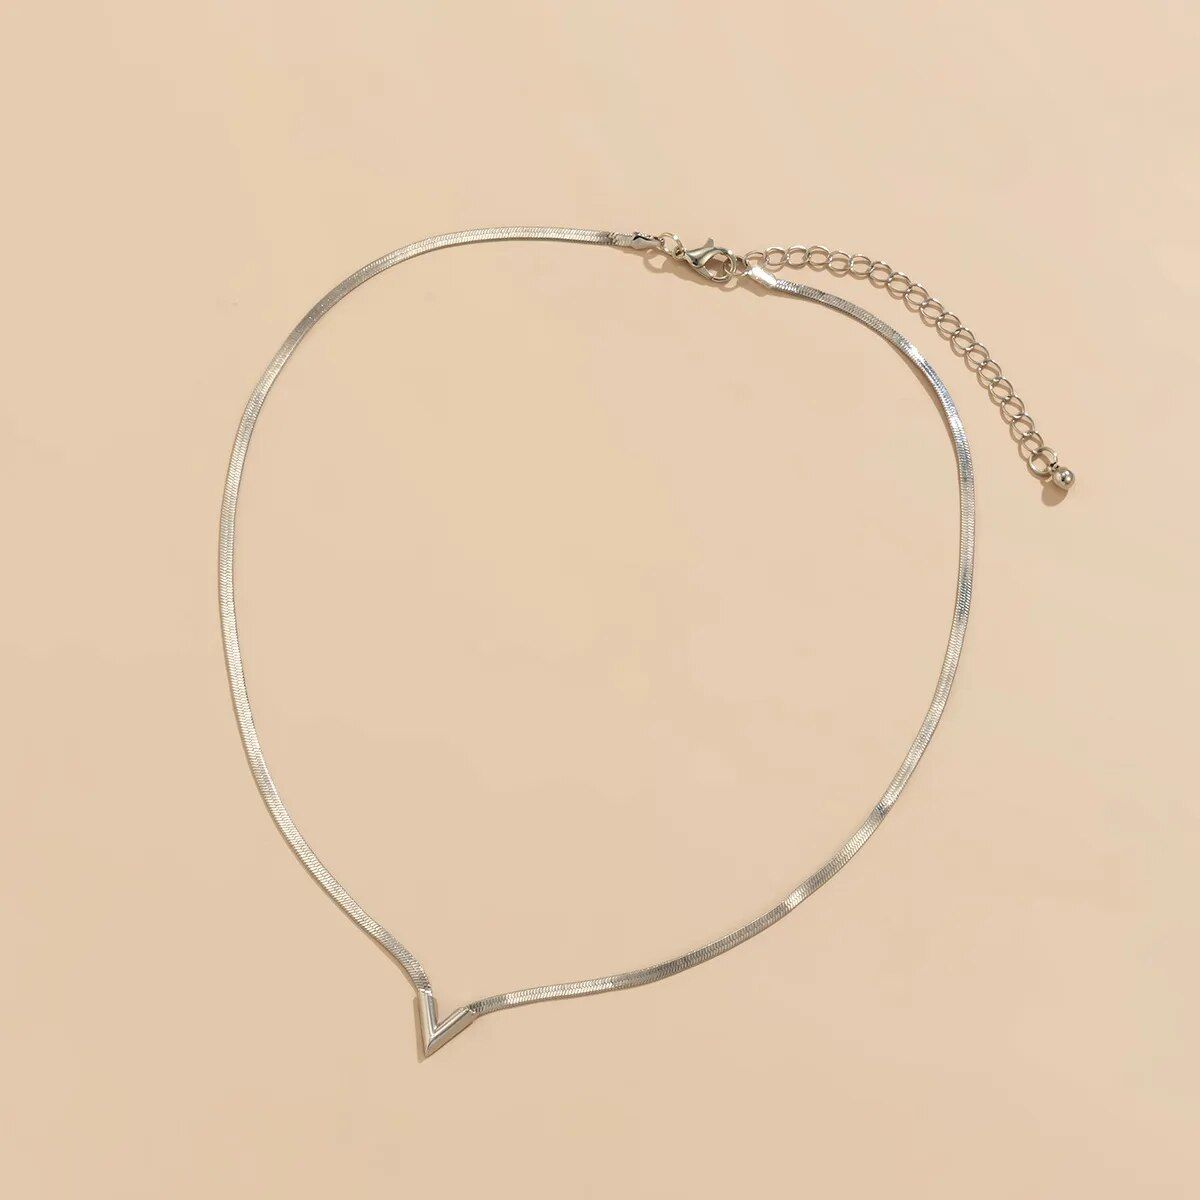 Elegant V-Shaped Flat Snake Chain Necklace with a v-shaped pendant, a new fashion accessory, on a beige background.